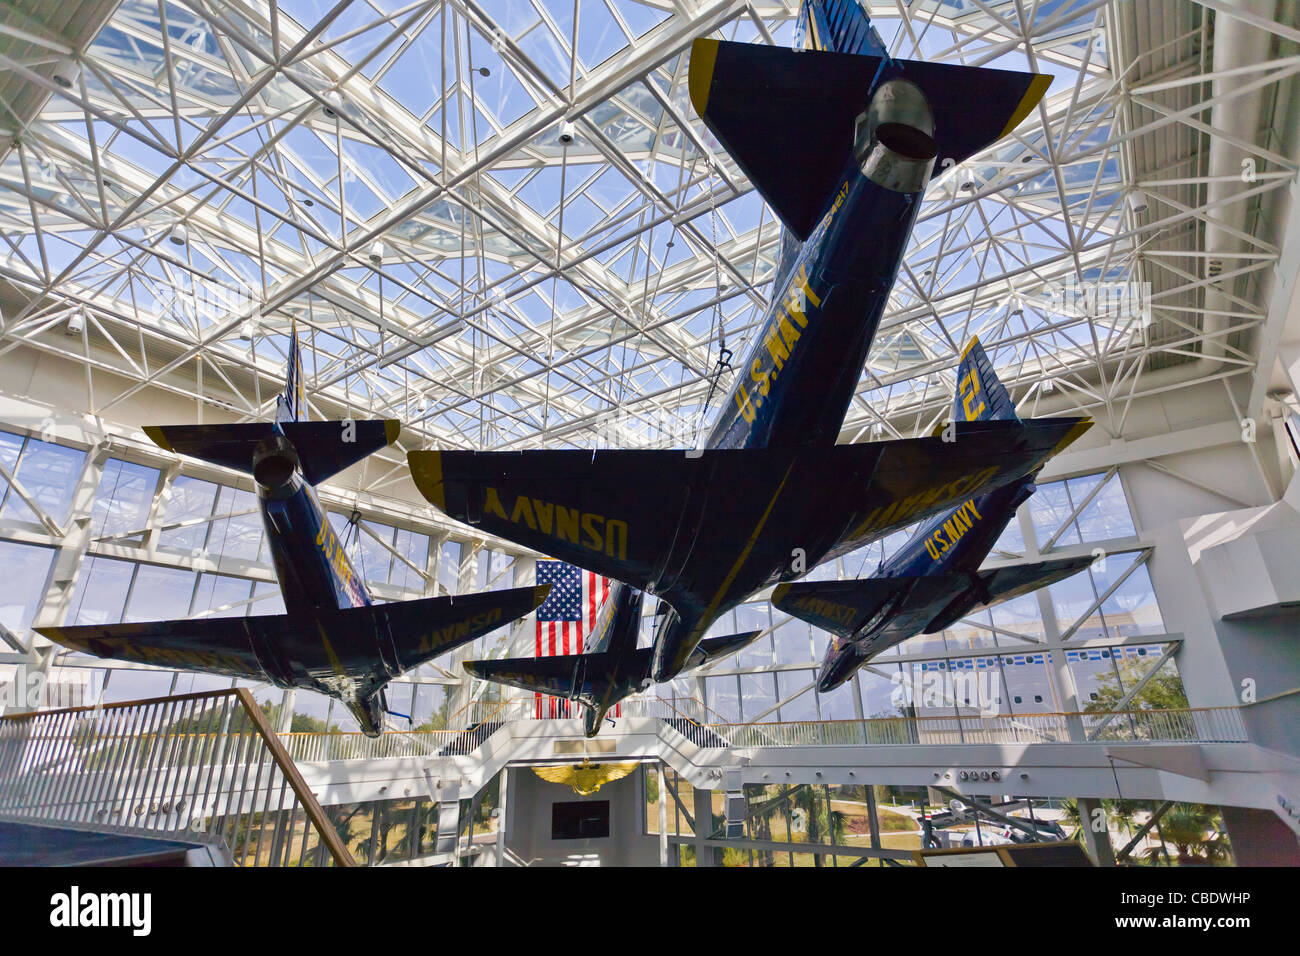 Blue Angel planes at the National Naval Aviation Museum in Pensacola Florida Stock Photo